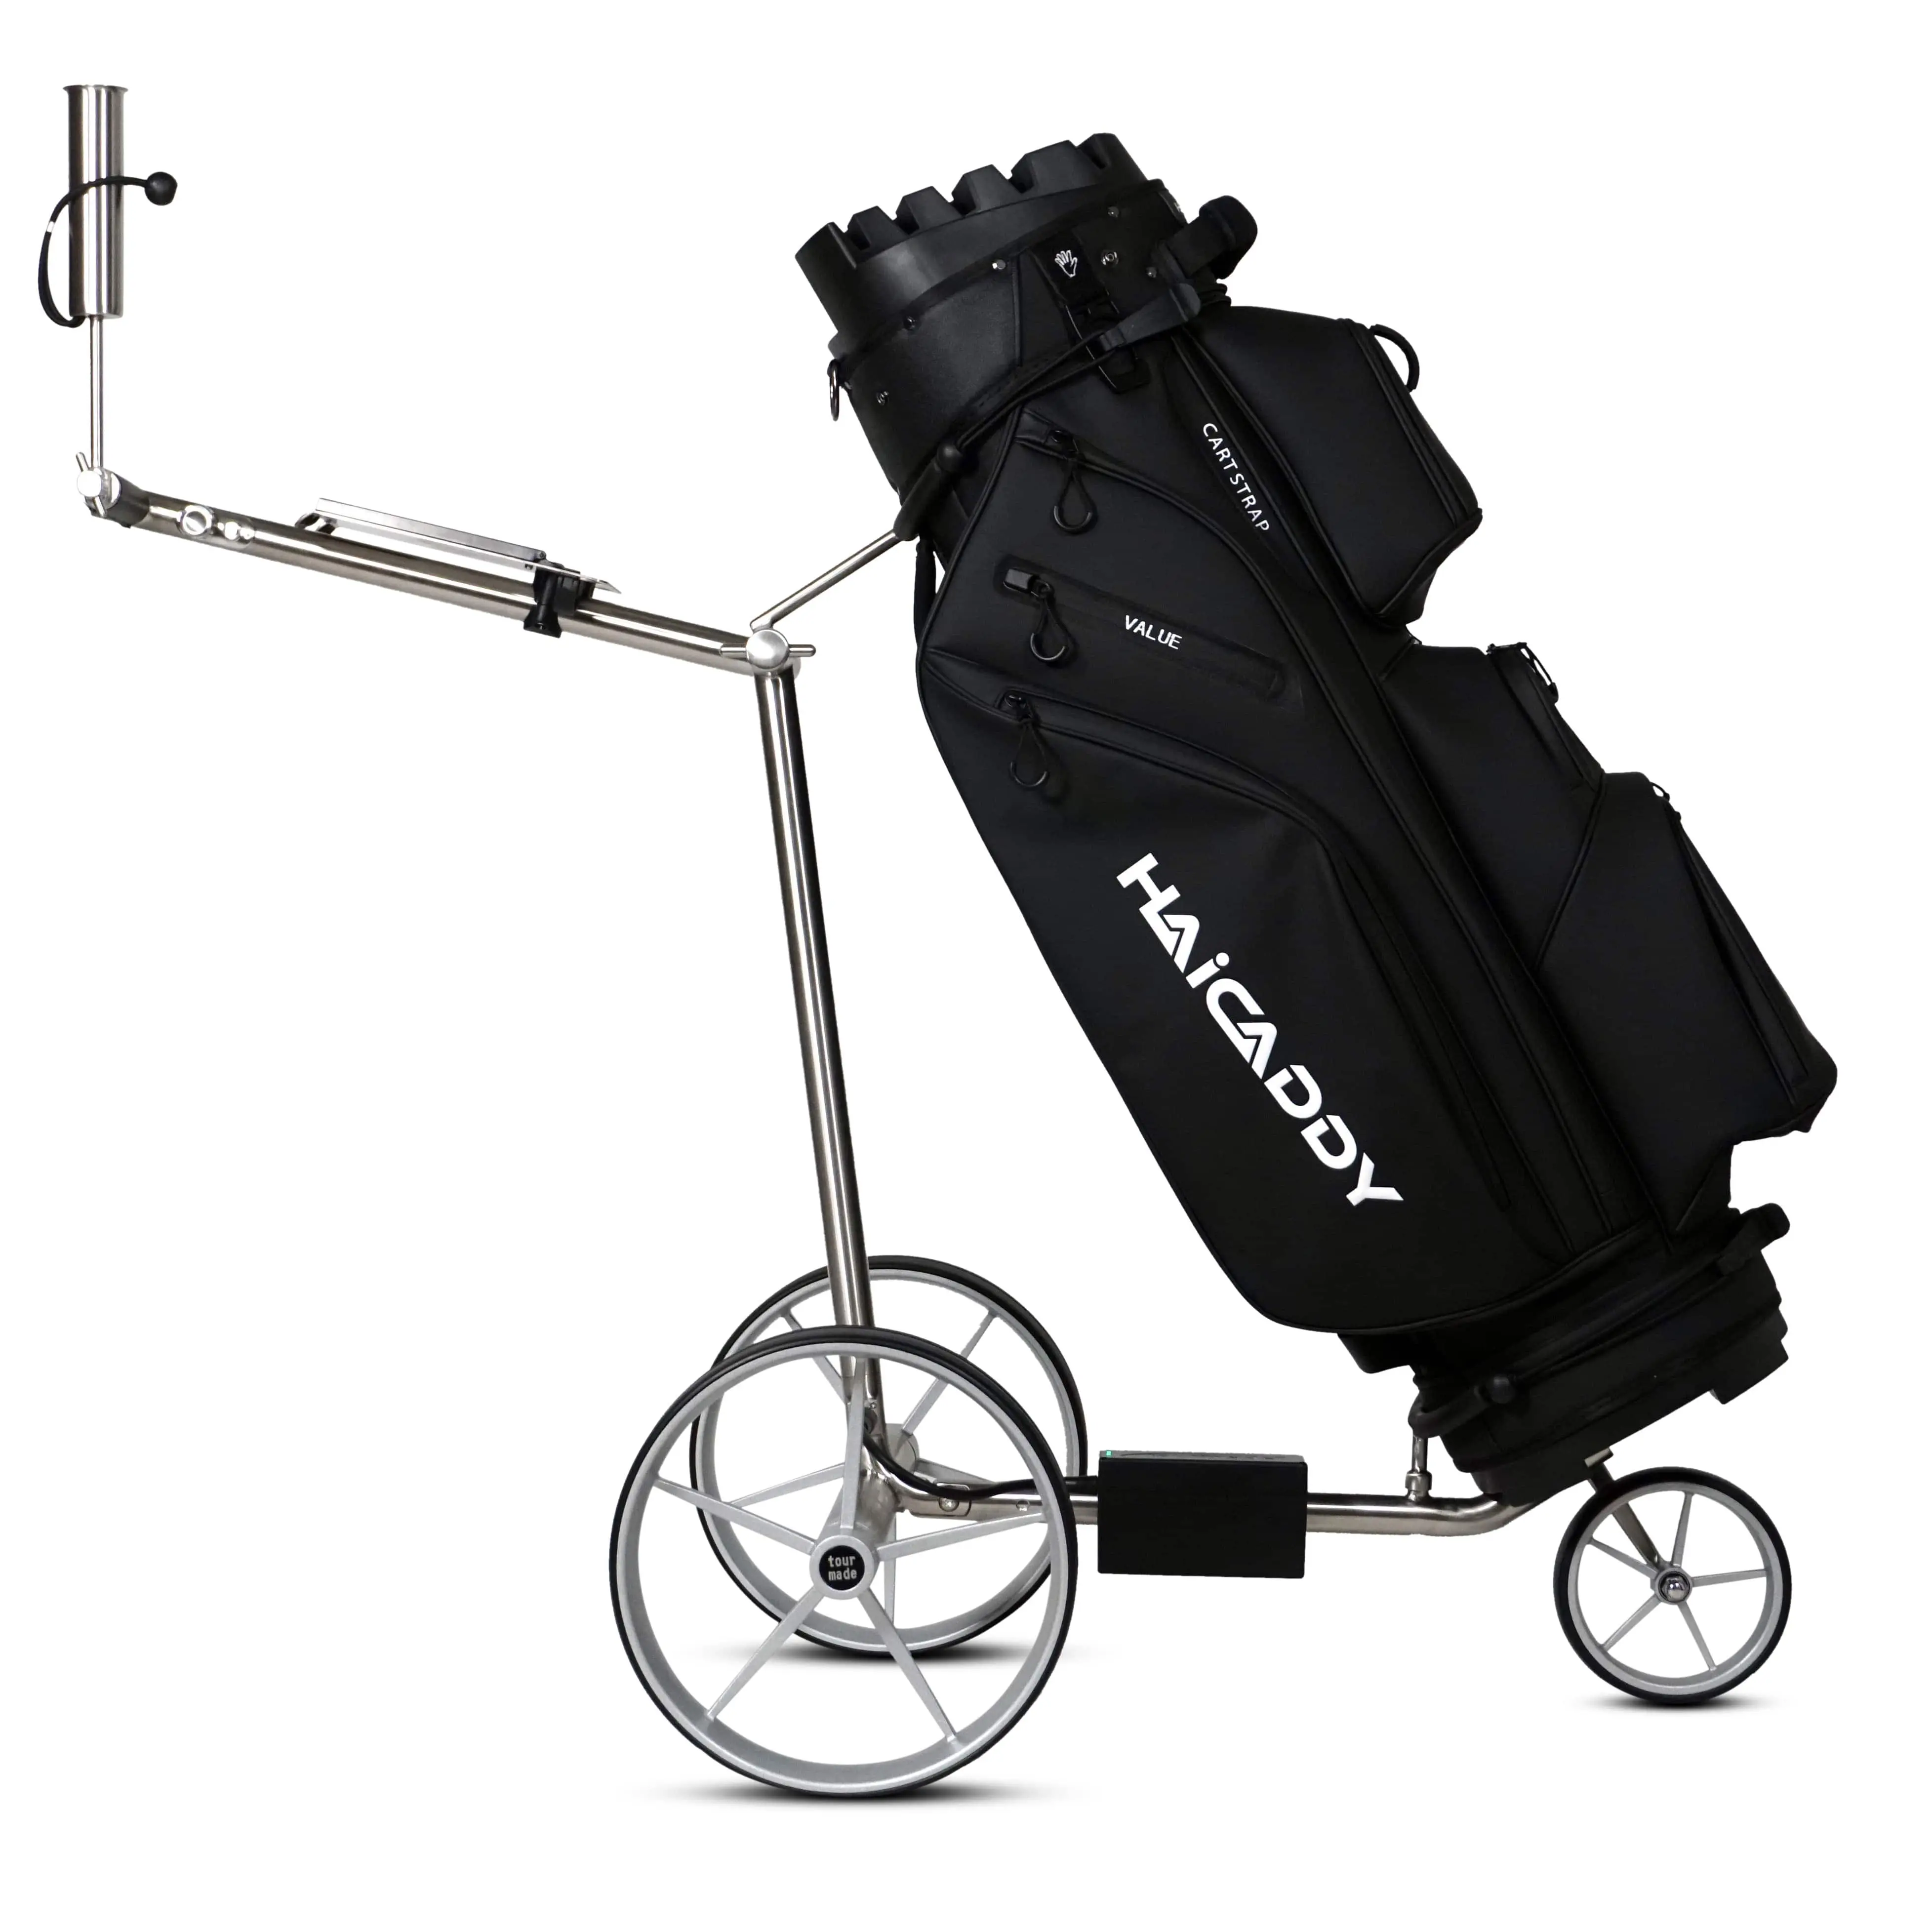 Tour Made Haicaddy® HC7 BRUSHED Edition electric golf trolley